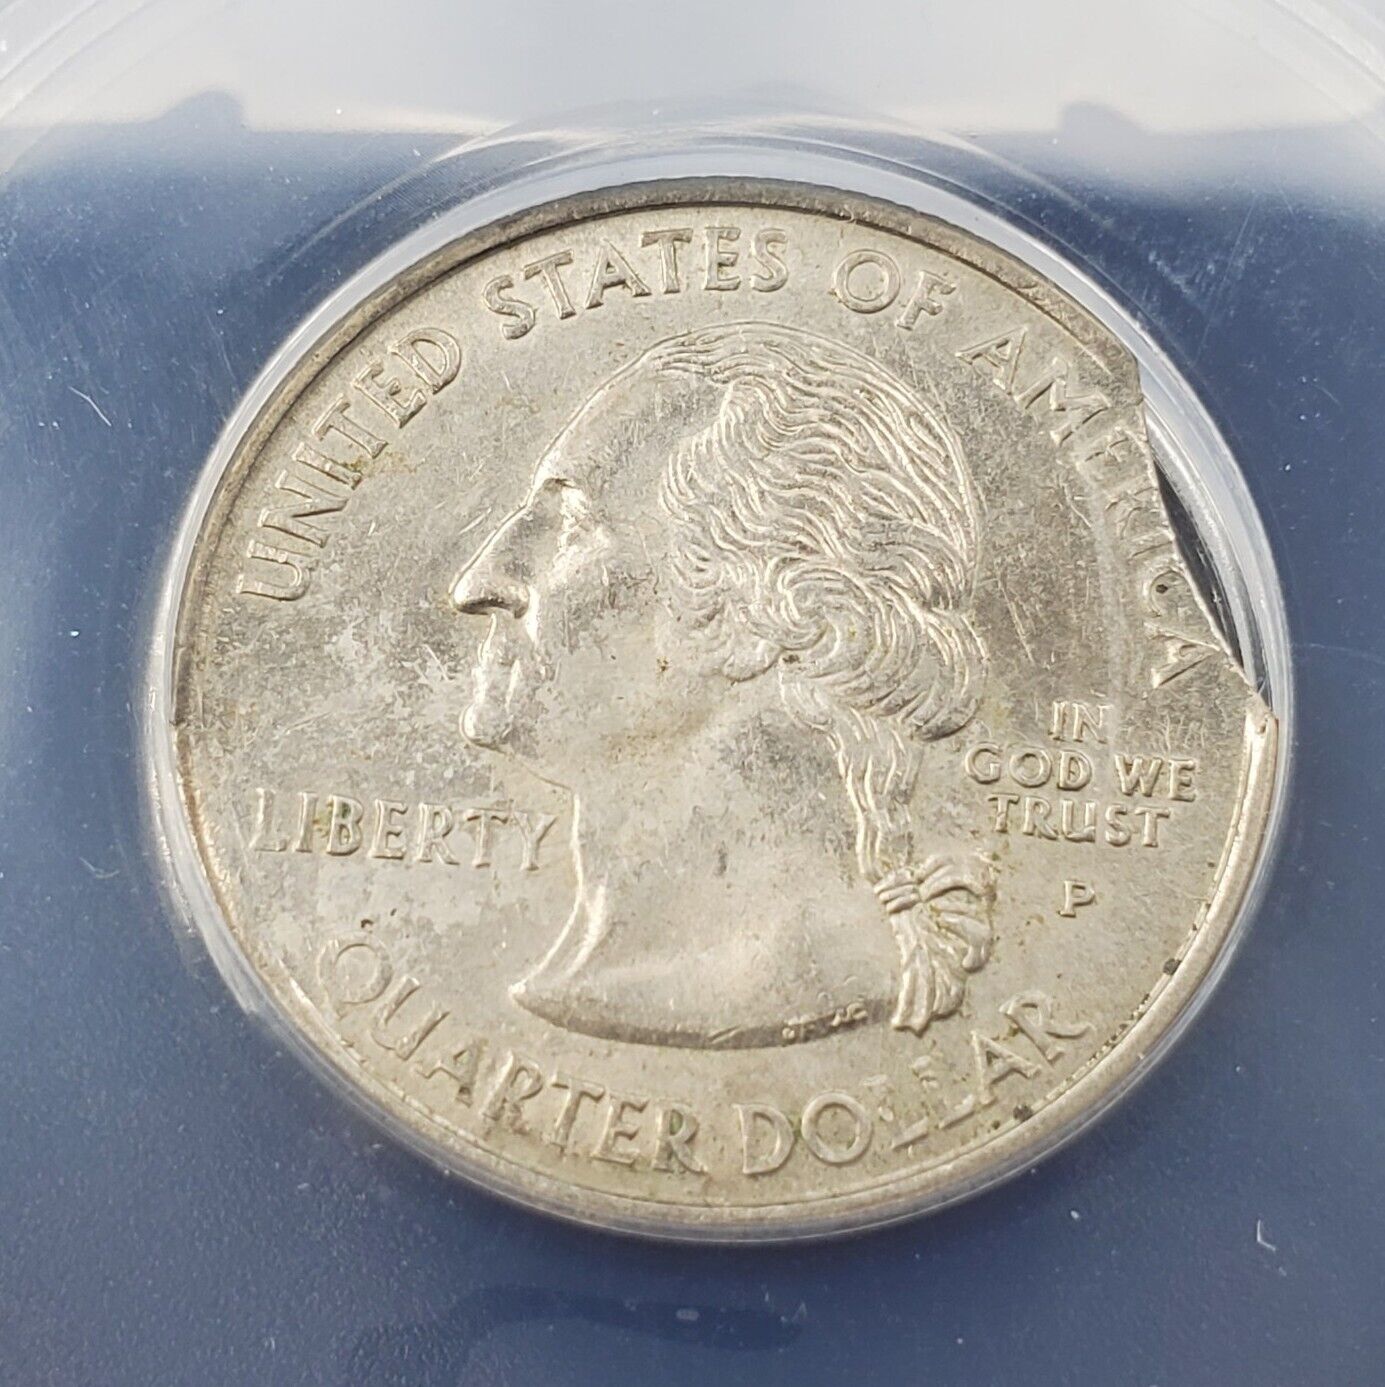 2002 P 25c TENNESSEE Quarters ANACS AU55 CURVED CLIP Weight 5.55 Grams Error